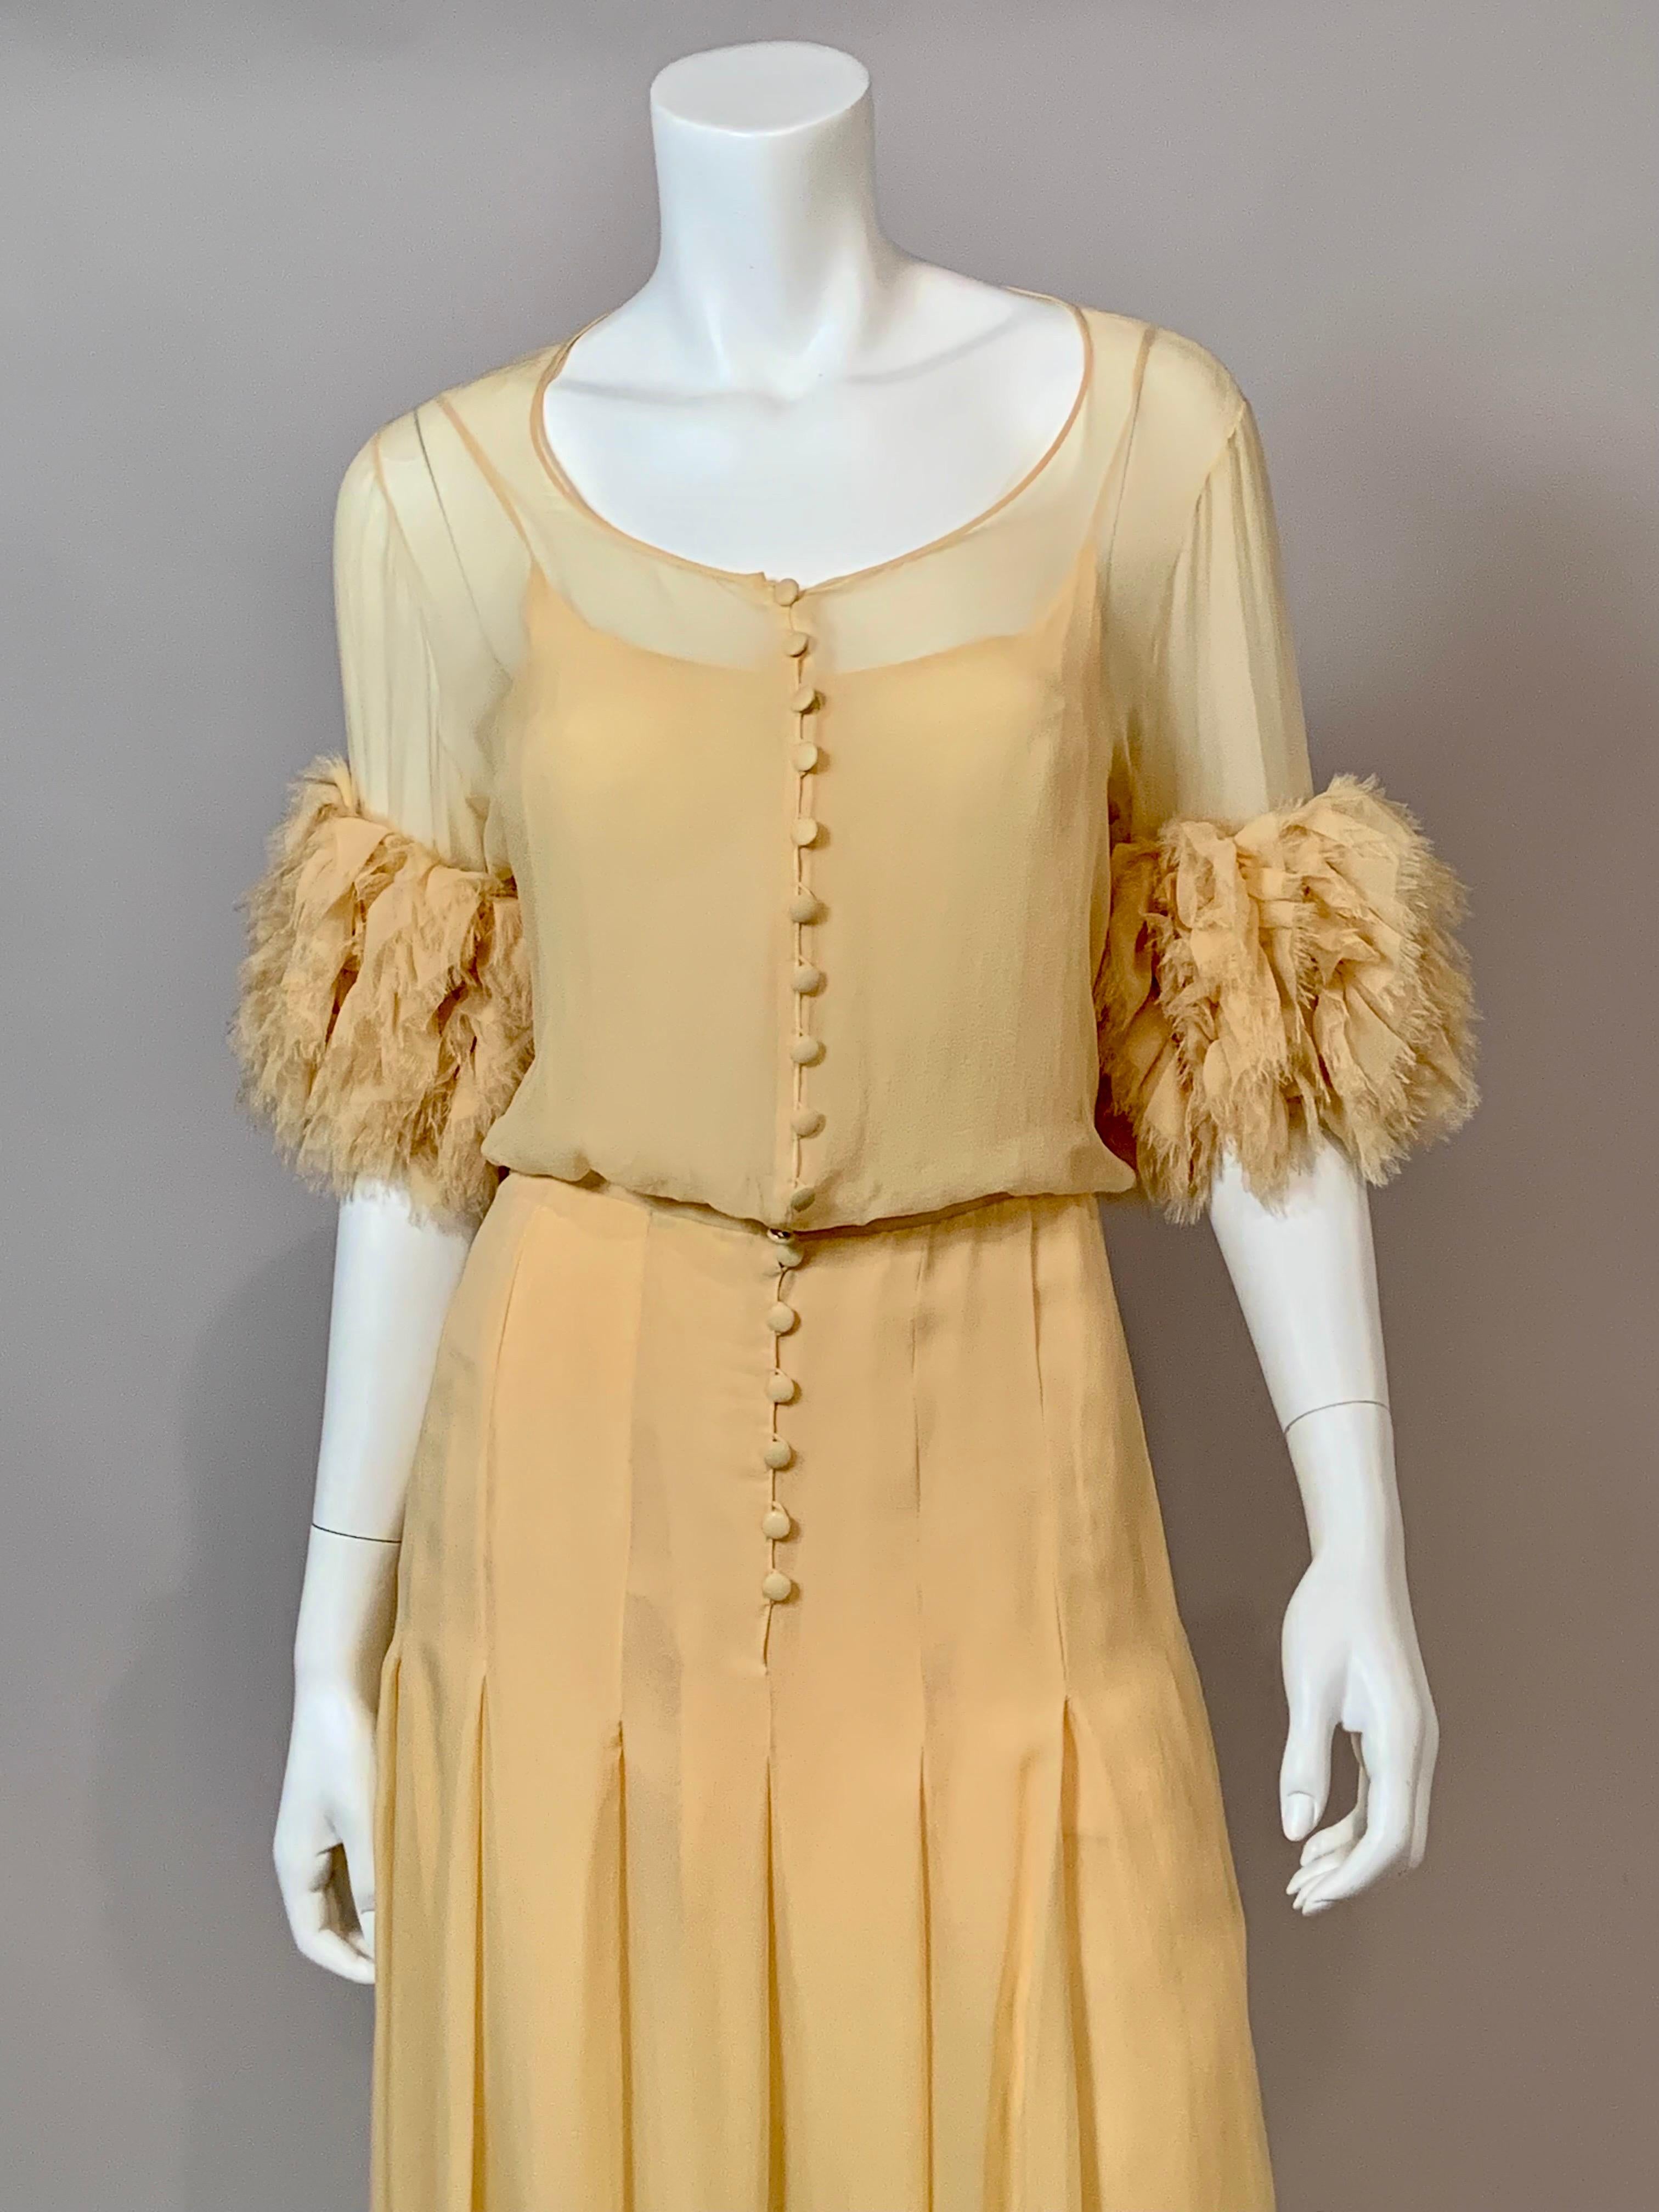 This elegant Chanel butter yellow silk chiffon evening gown was designed by Karl Lagerfeld for the Spring 1984 collection.  It has a round neckline, fabulous ruffled sleeves and covered buttons and loops at the center front. The skirt is two layers